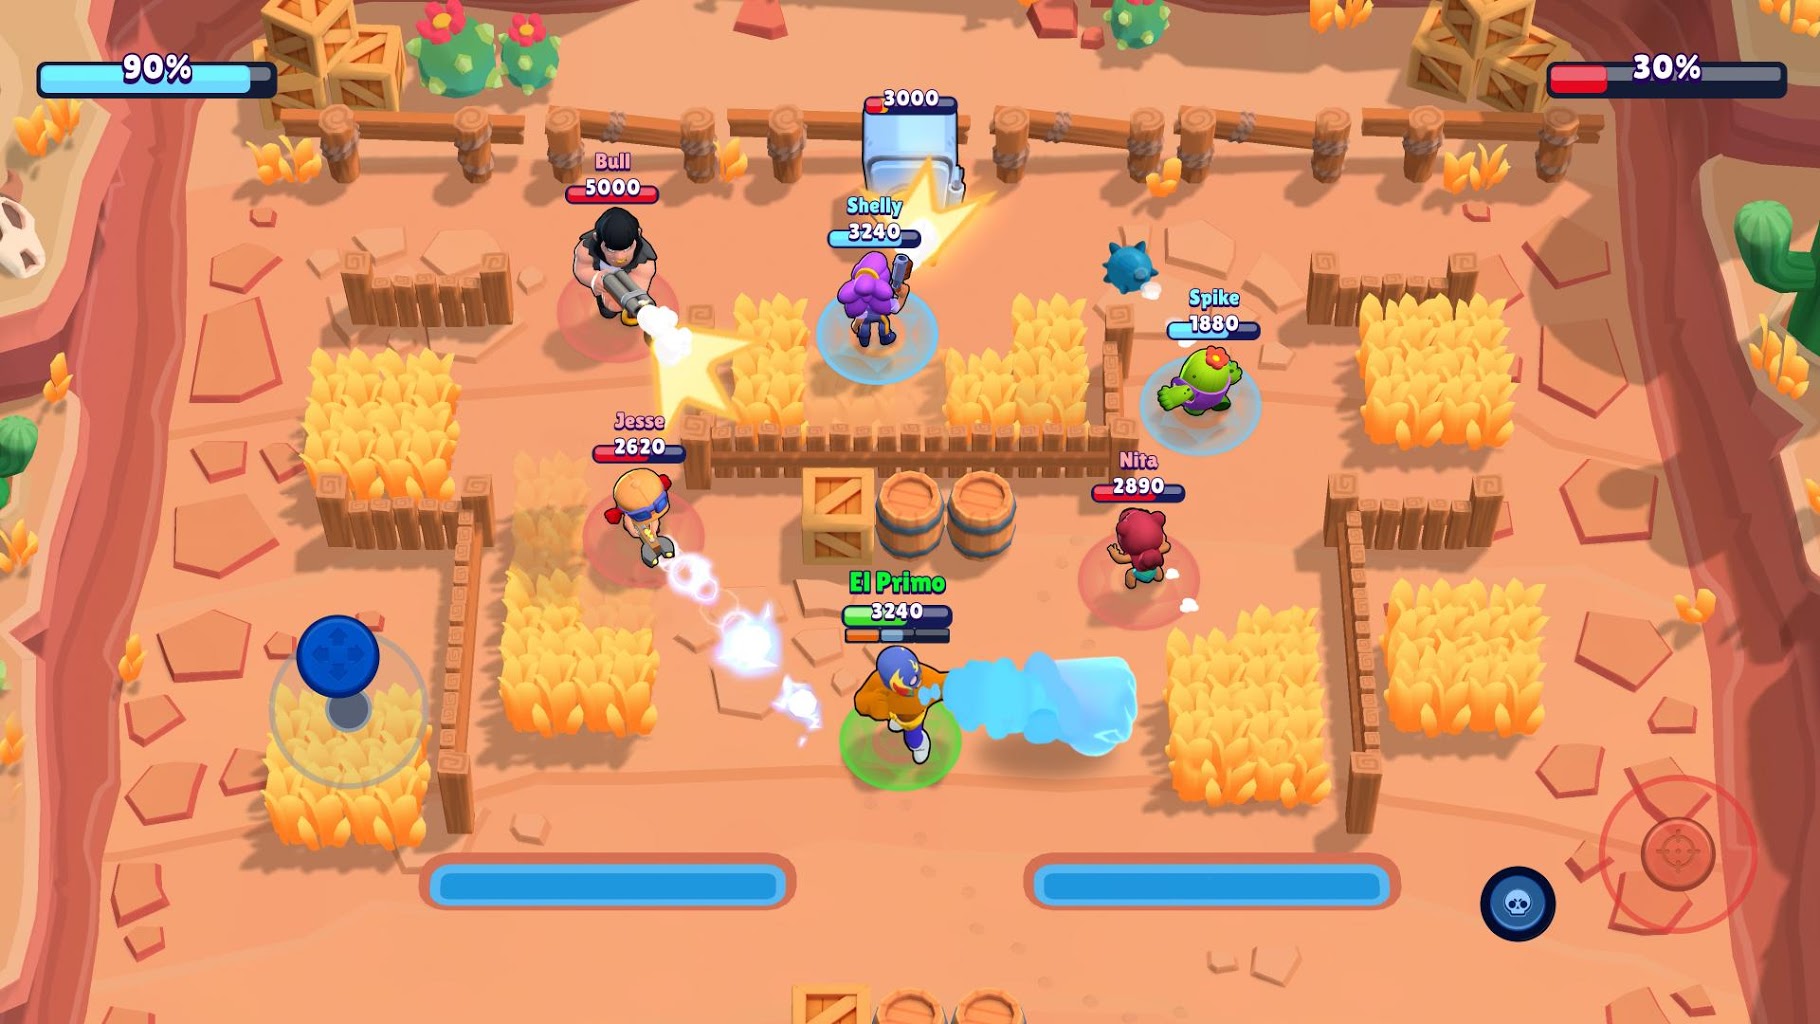 Download Brawl Stars 36 253 Apk Mod Money For Android - download brawl stars mod android